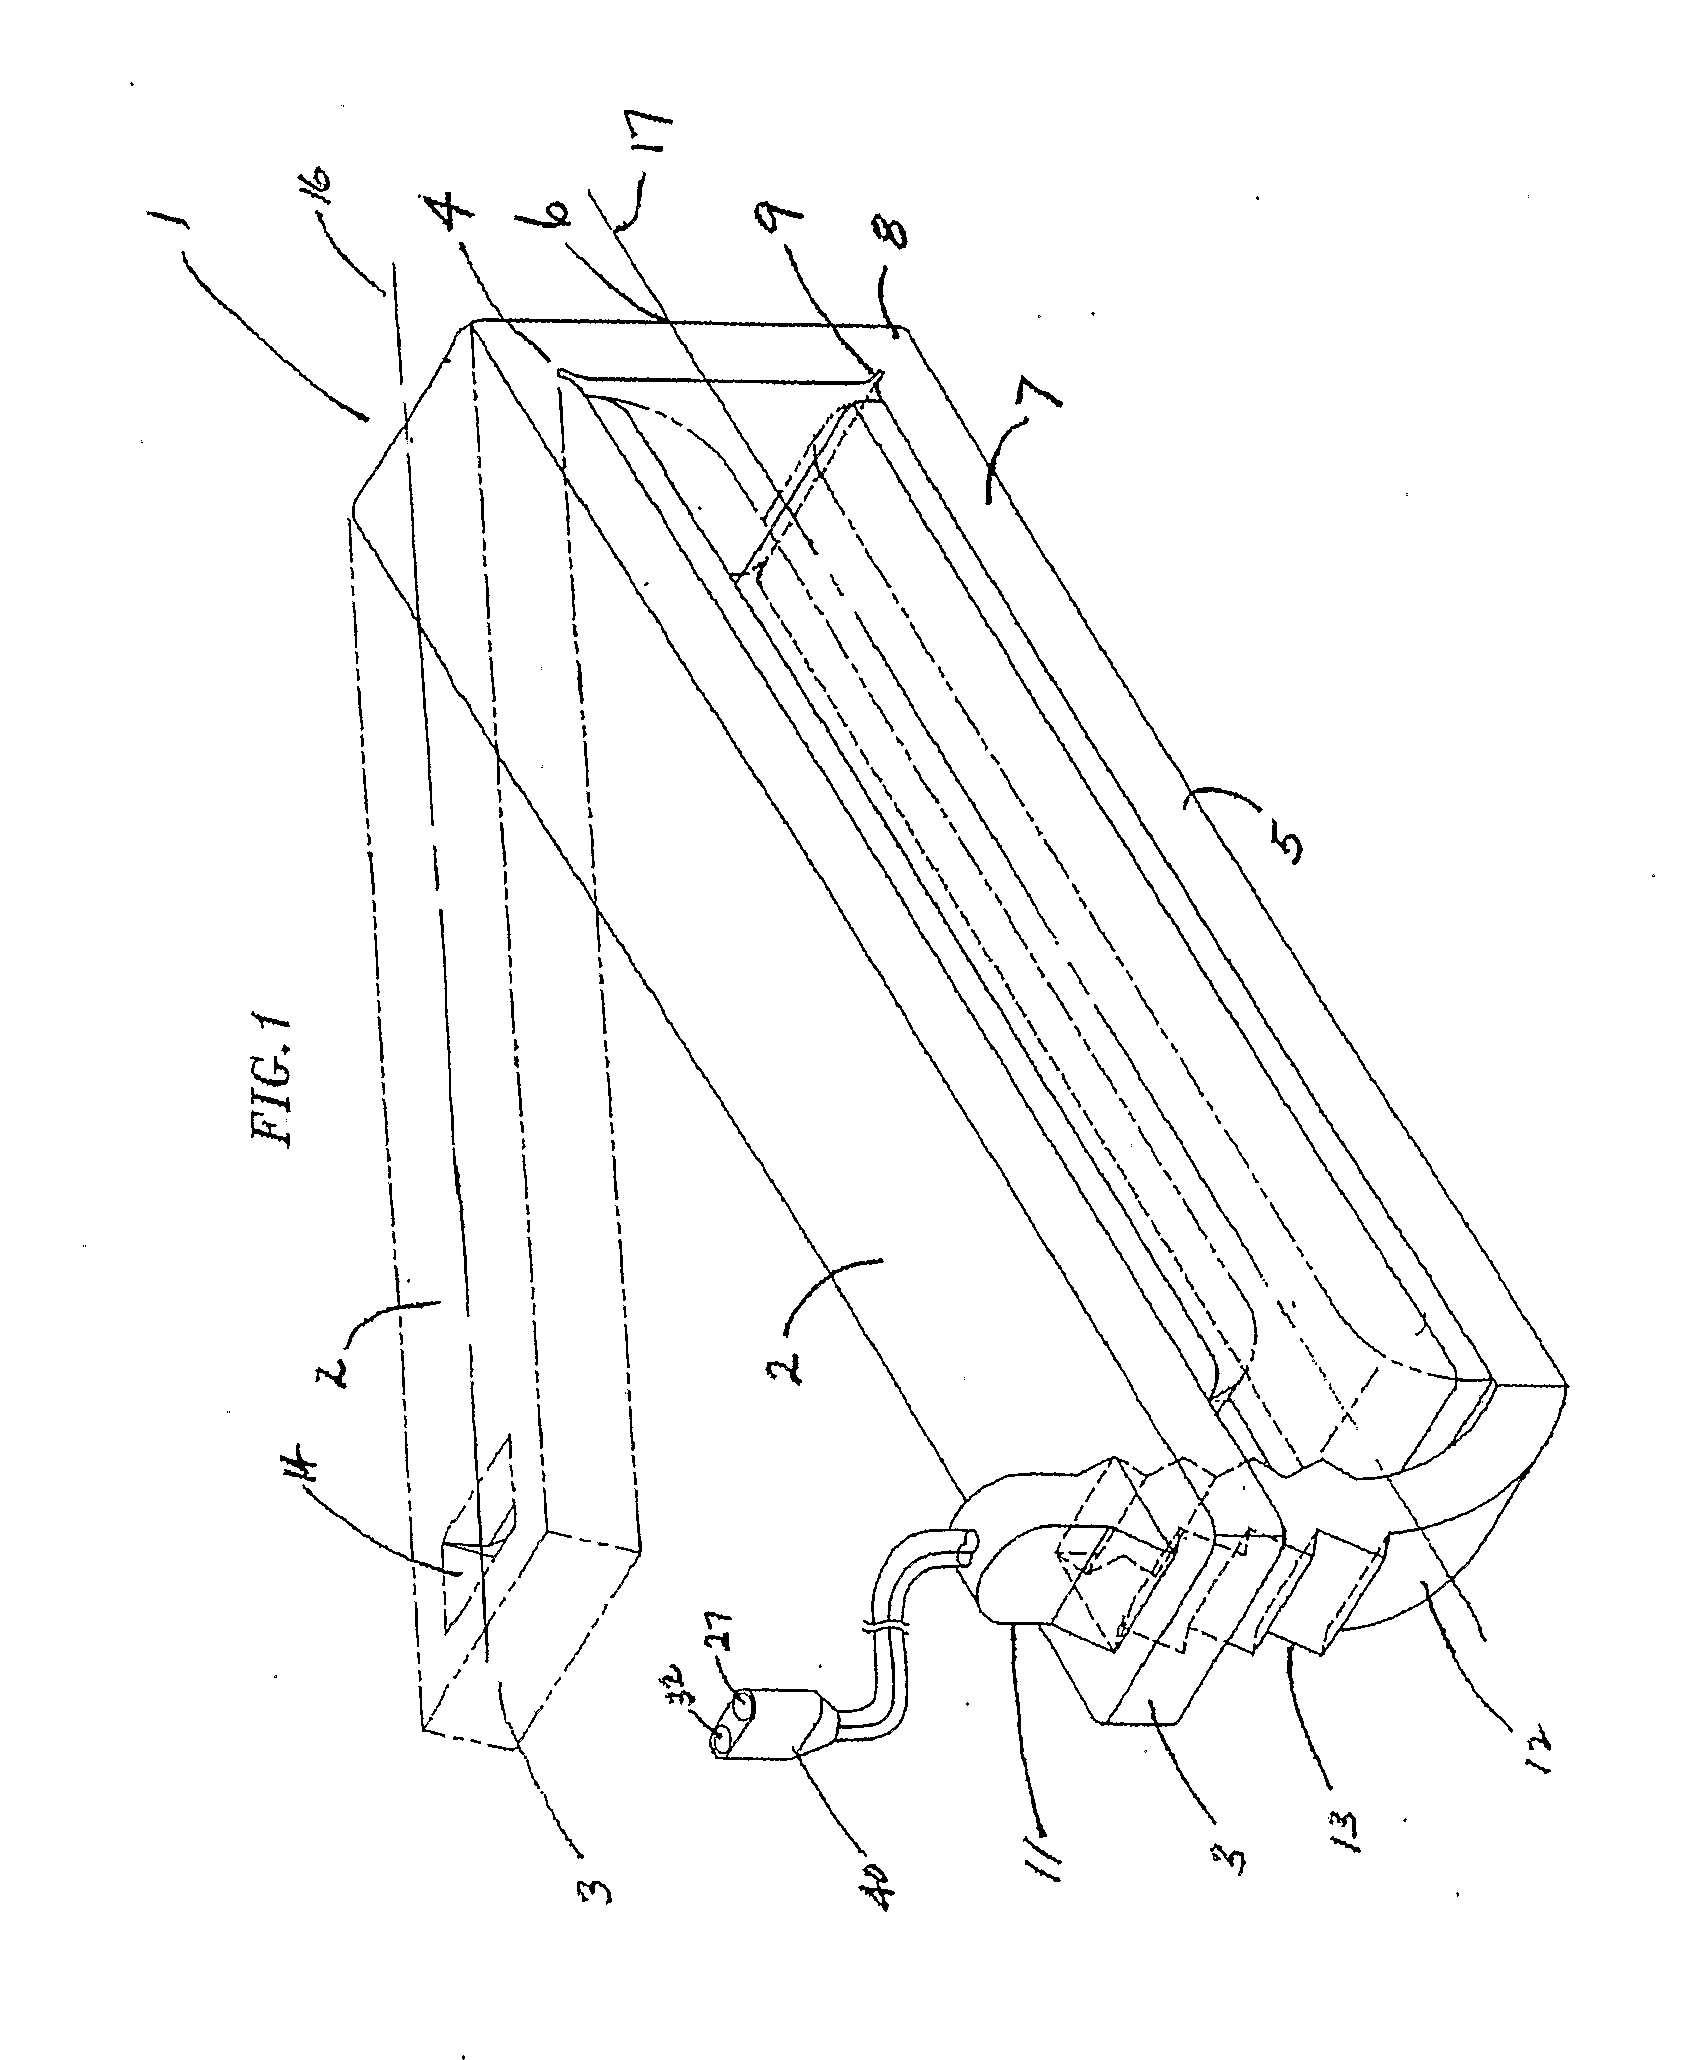 Clamp Device to Plicate the Stomach